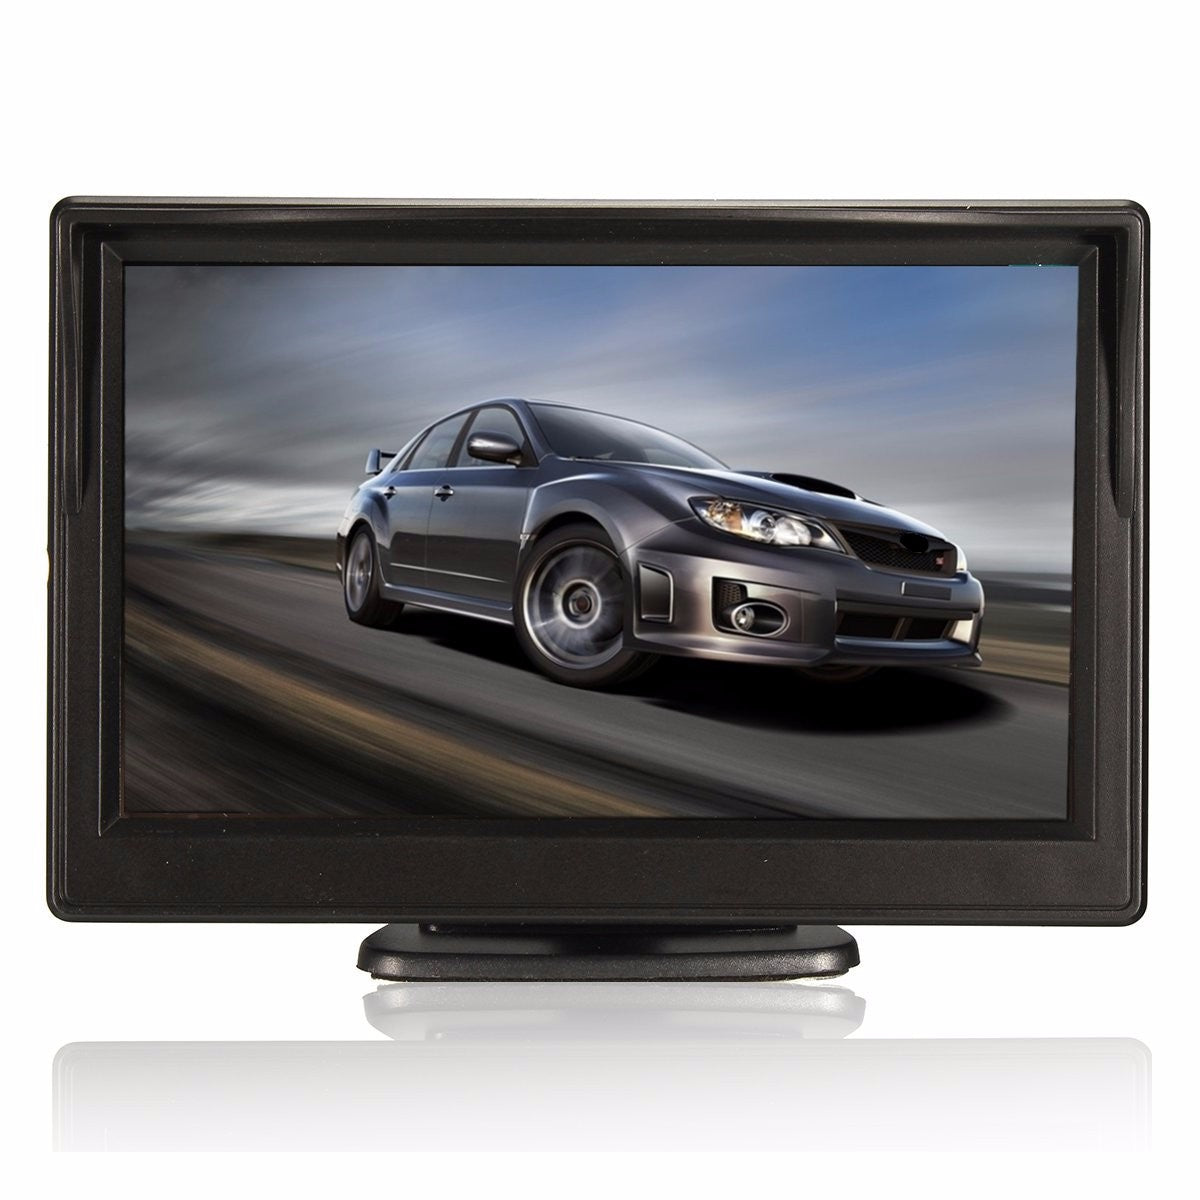 Light Slate Gray 5 Inch TFT LCD Car Rear View Backup Reverse Monitor Parking Night Vision LED Backlight Display Multimedia Player